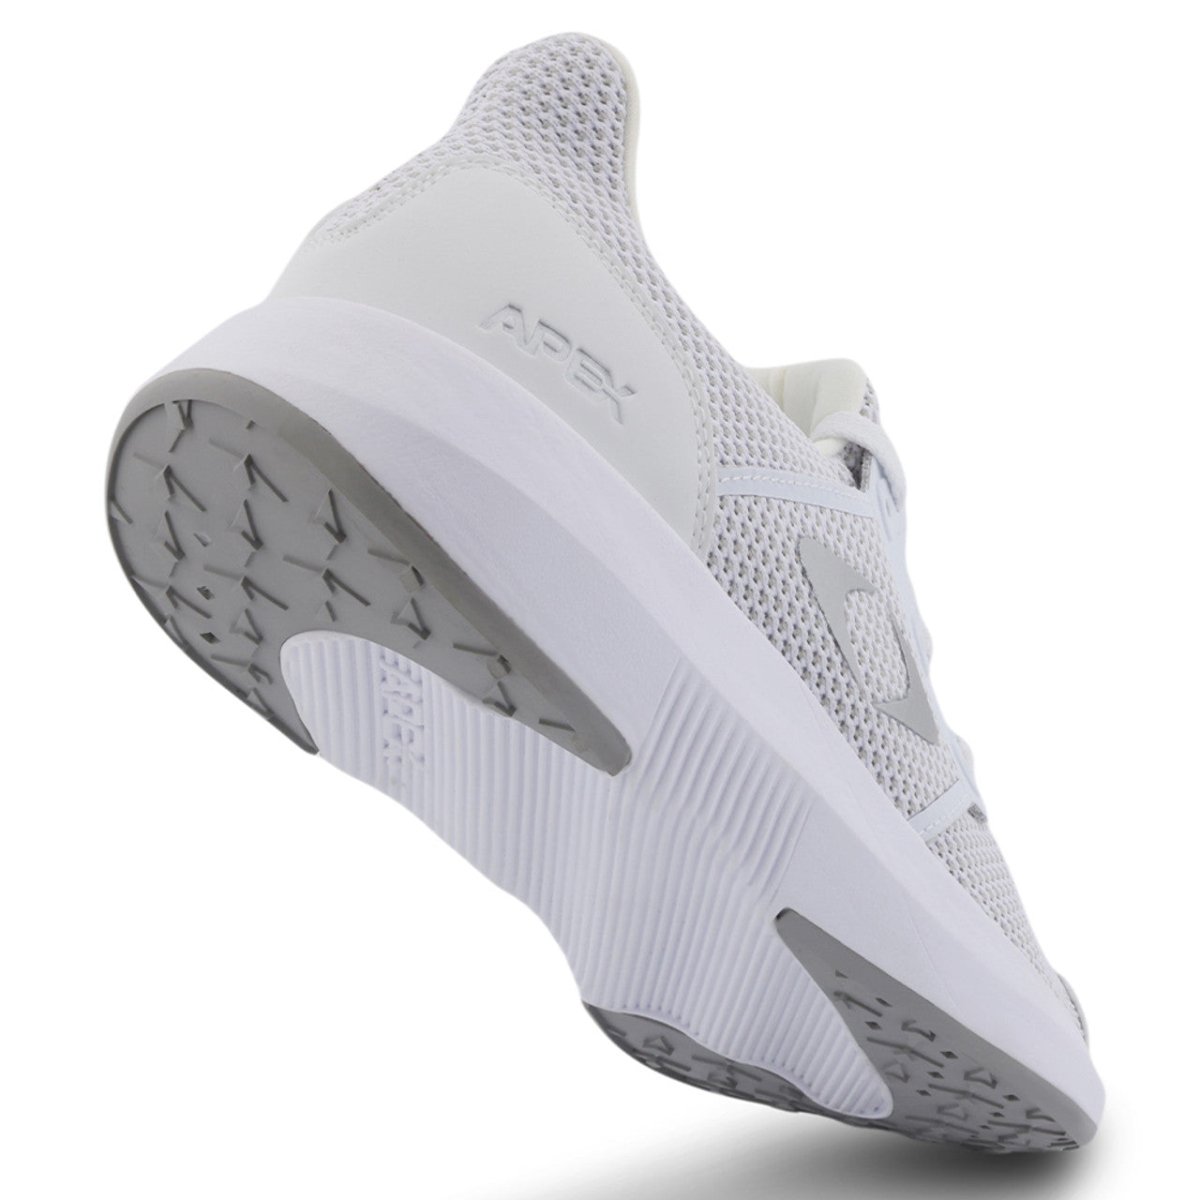 APEX P7200M PERFORMANCE ATHLETIC MEN'S SNEAKER IN WHITE - TLW Shoes